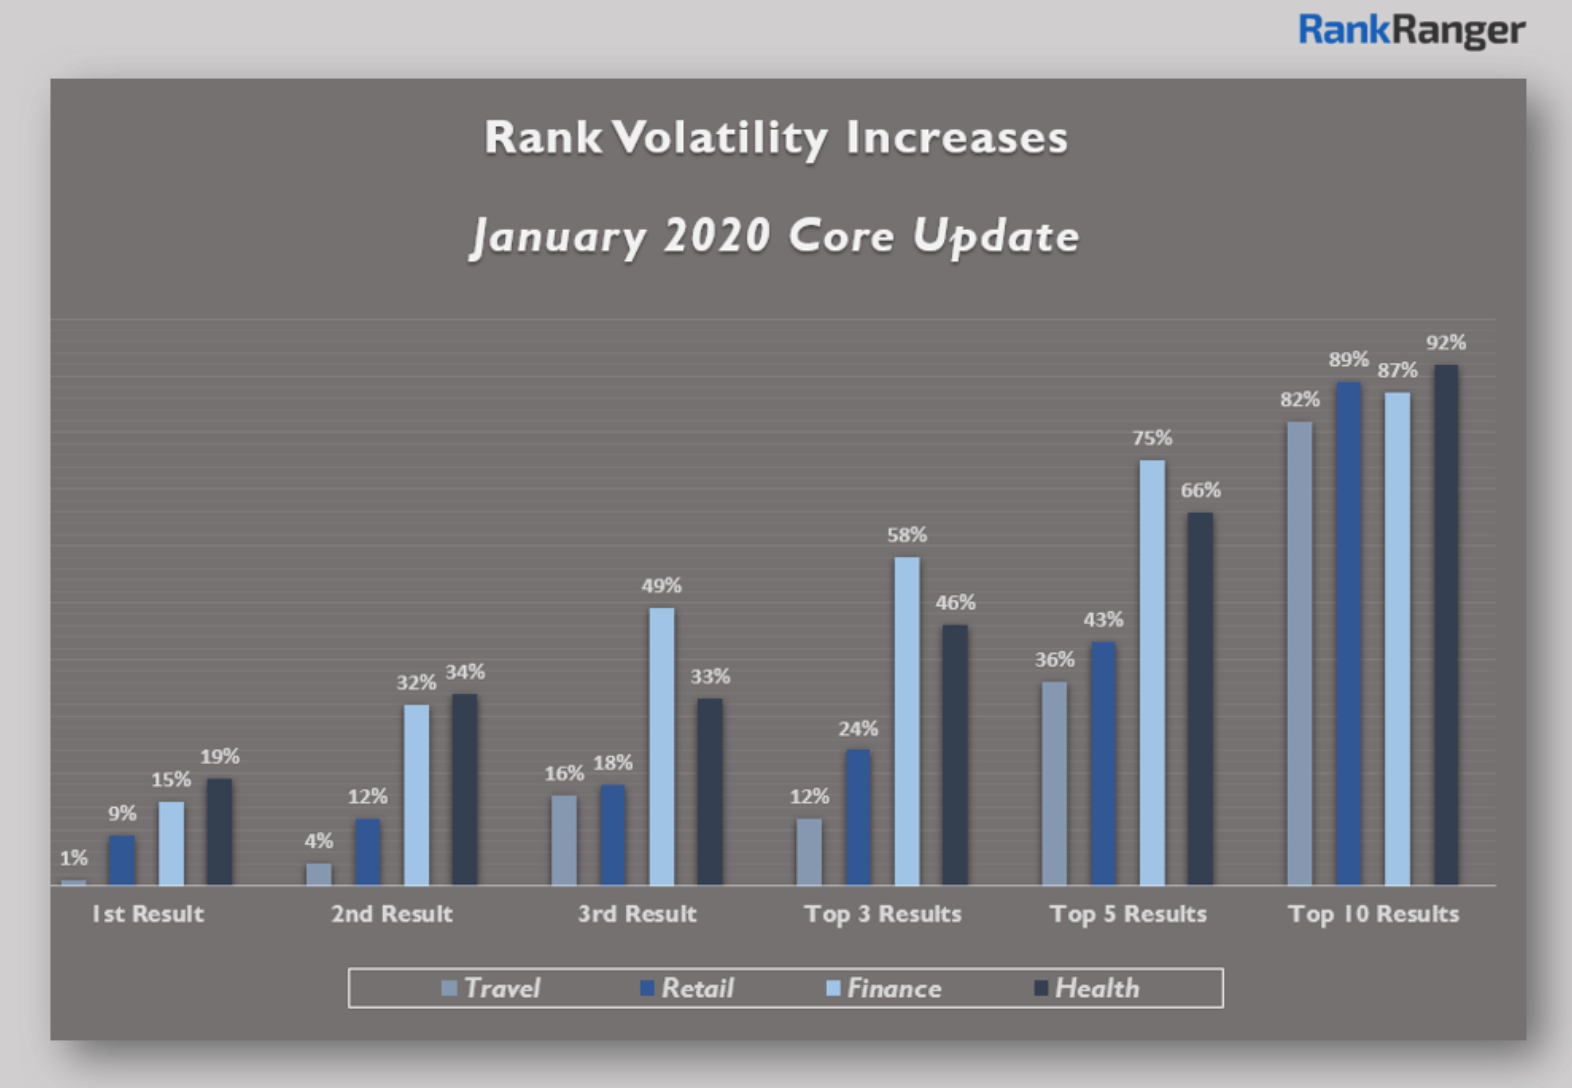 A graph of rank volatility increases when compared to the tiers of results as of January 2020